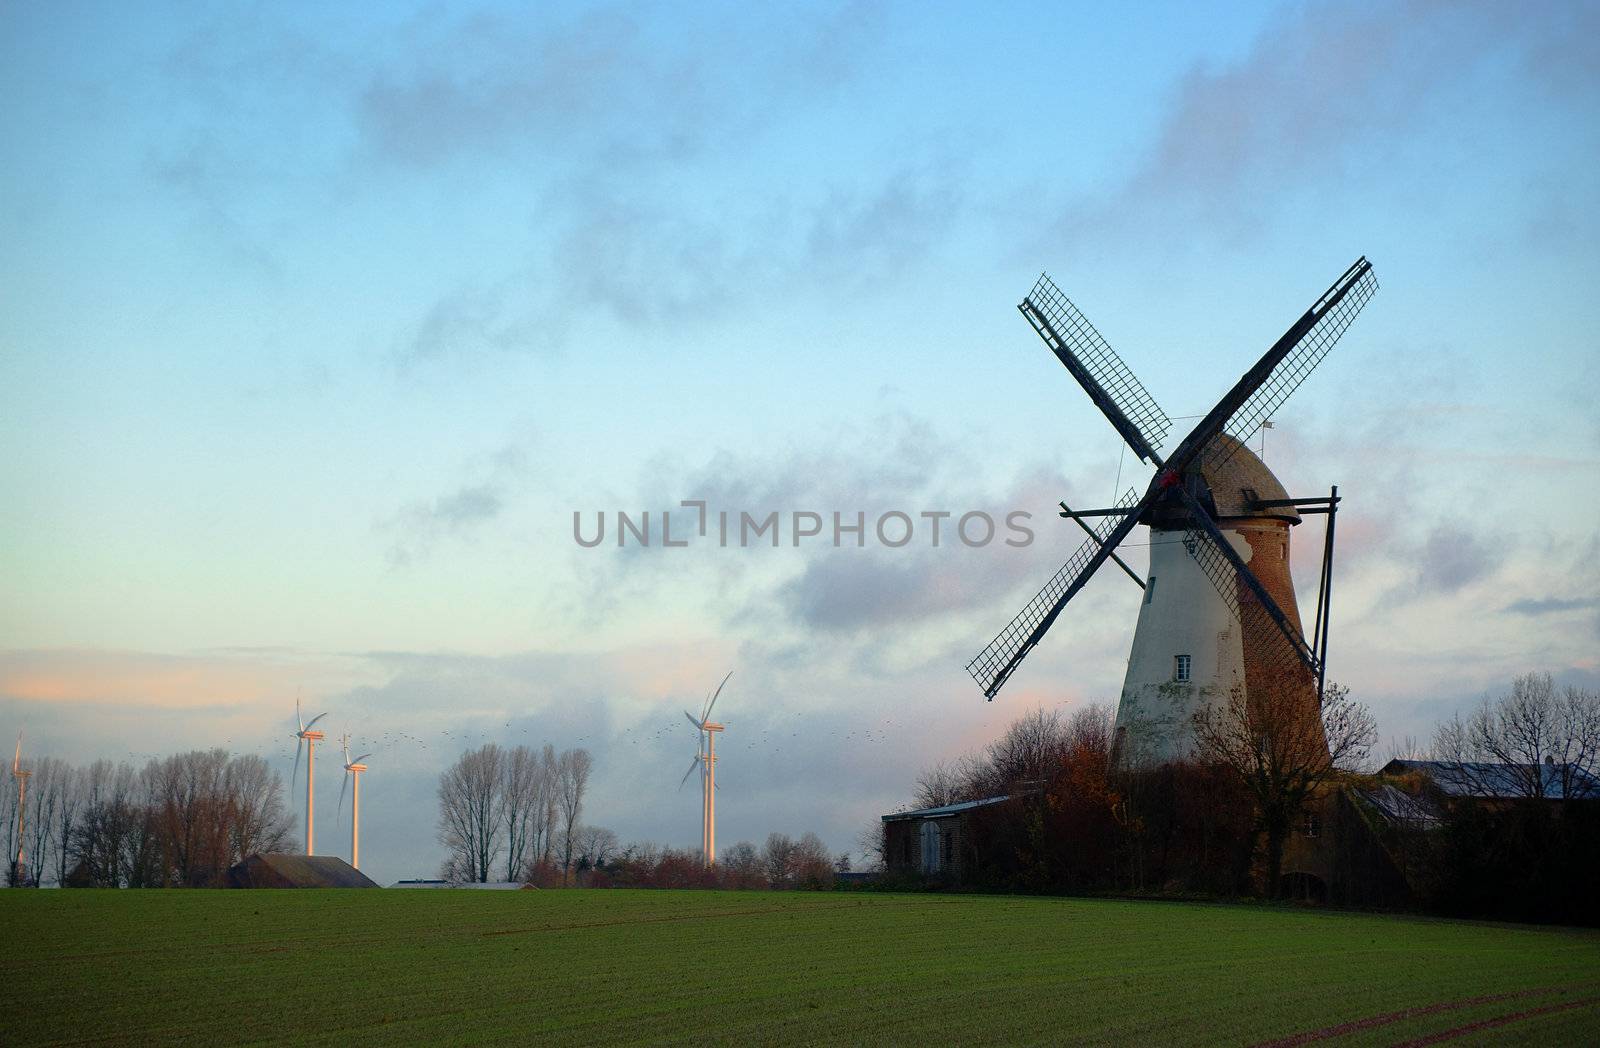 Morning light, traditional windmill in the foreground and modern windmill generators on a background